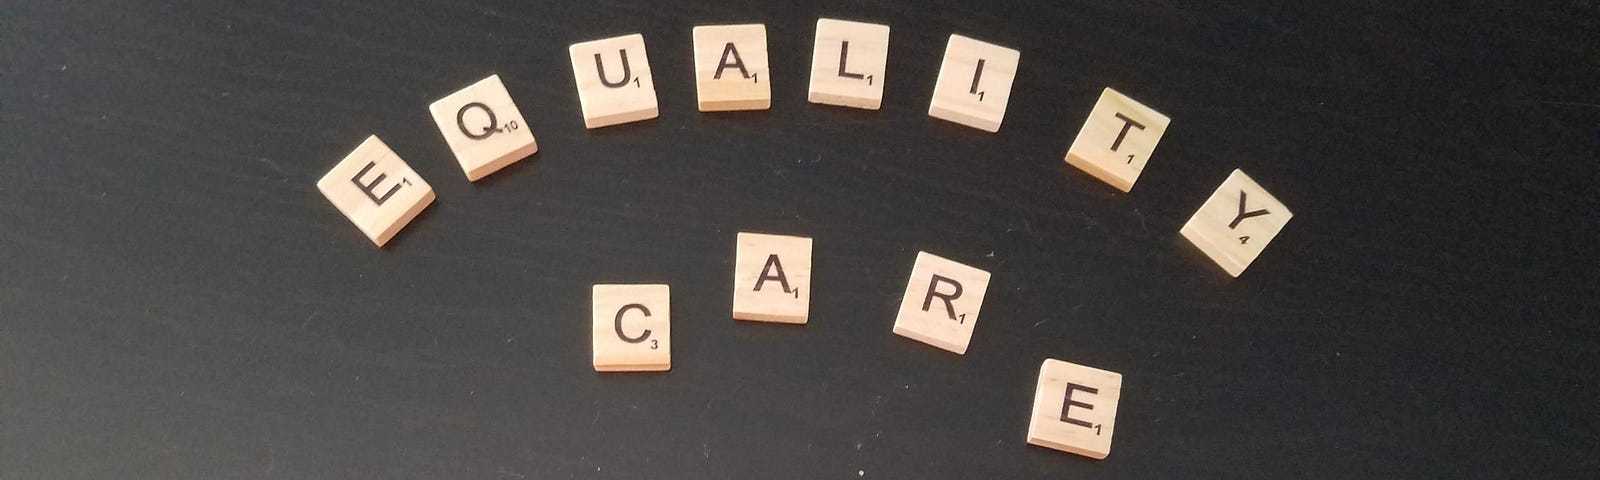 The important words from the poem: Equality Care See Respect